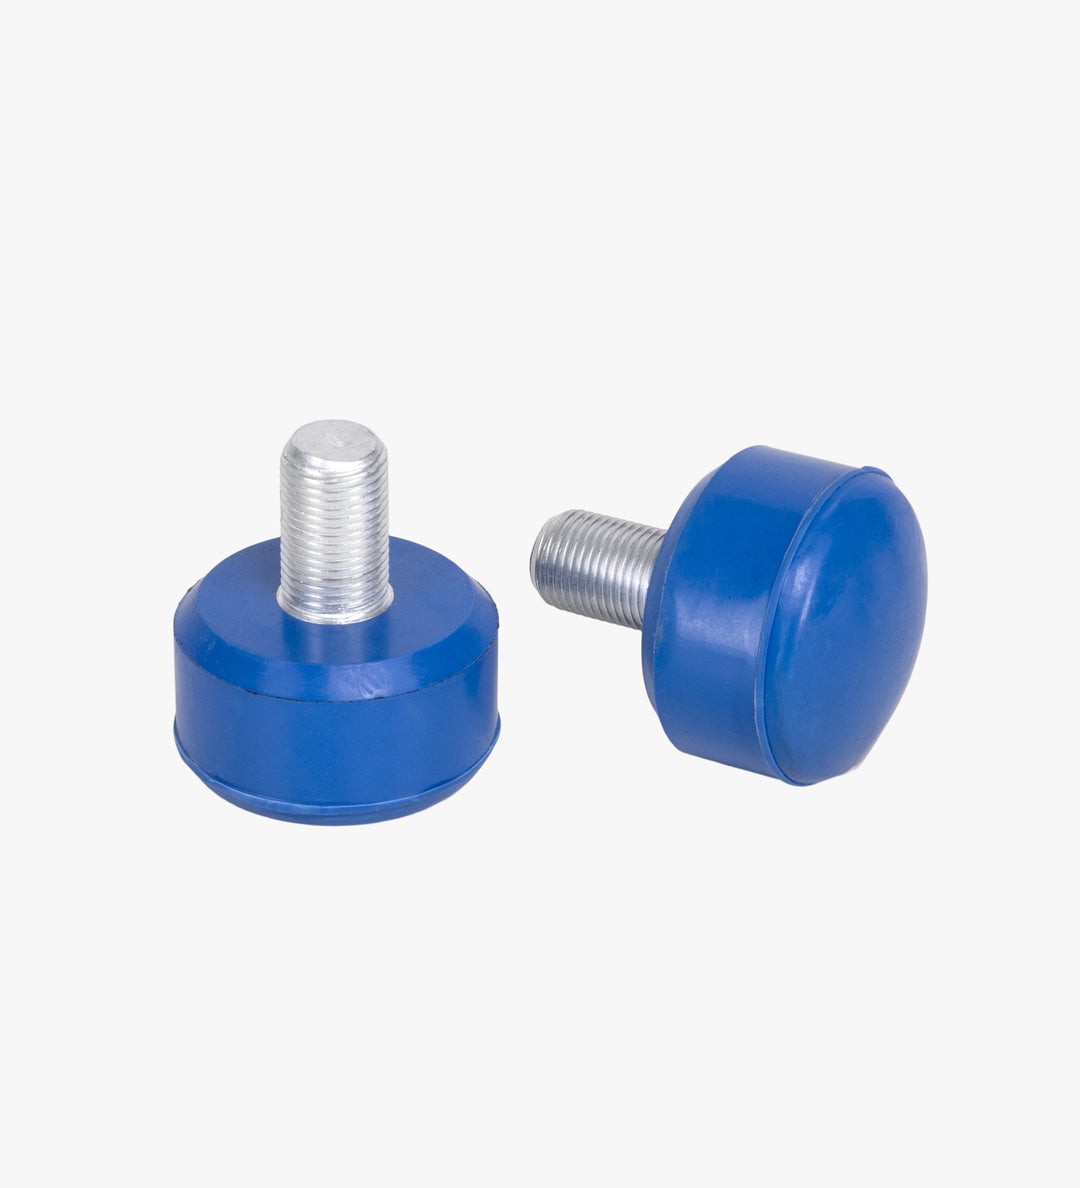 Dark Blue Adjustable C7 roller skate stoppers as seen on Midsummer’s Eve, made from durable rubber and measure 47 by 35 mm. 